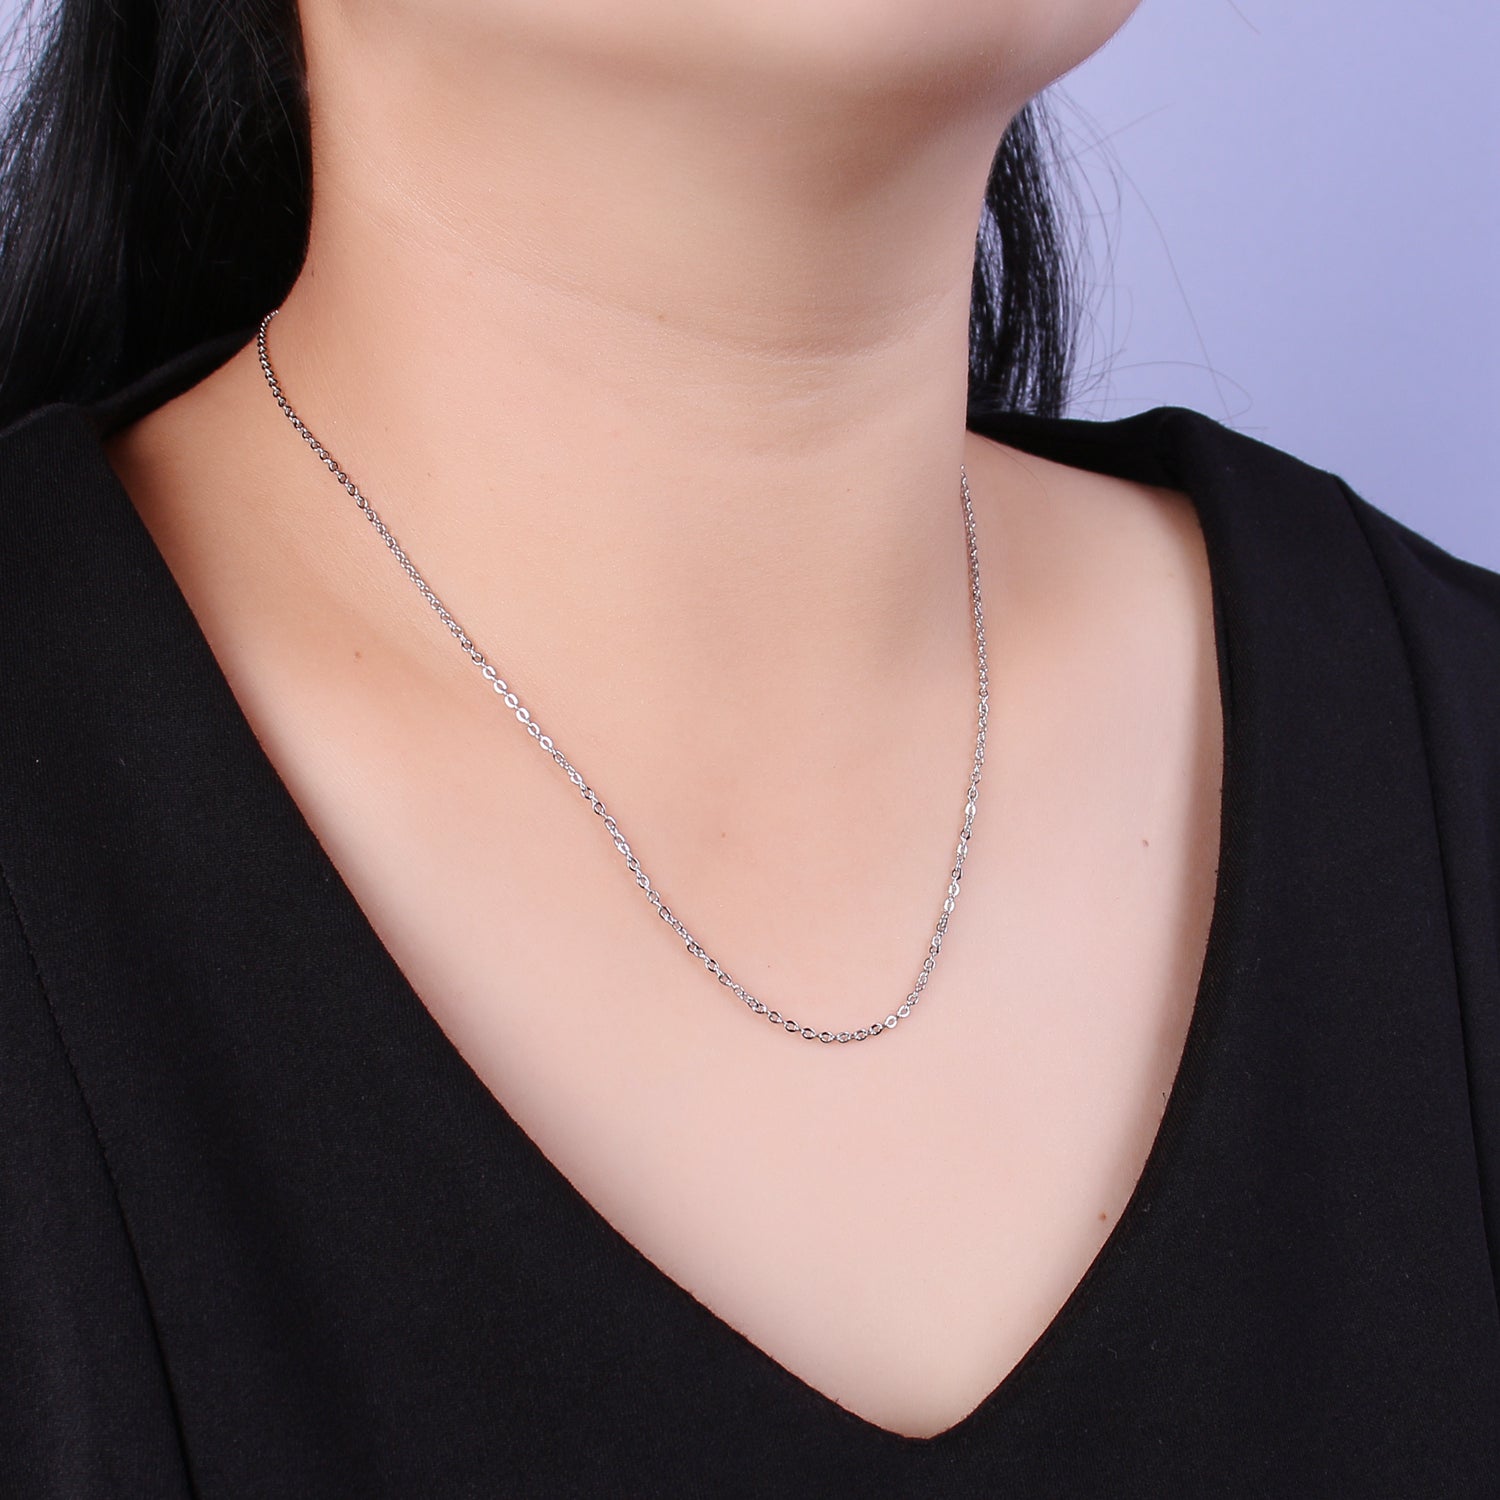 Plain Gold Chain Necklace // 18k Gold Filled Chain /  Simple and Pretty • Layering Necklace 15.5 inch CN1254 - DLUXCA